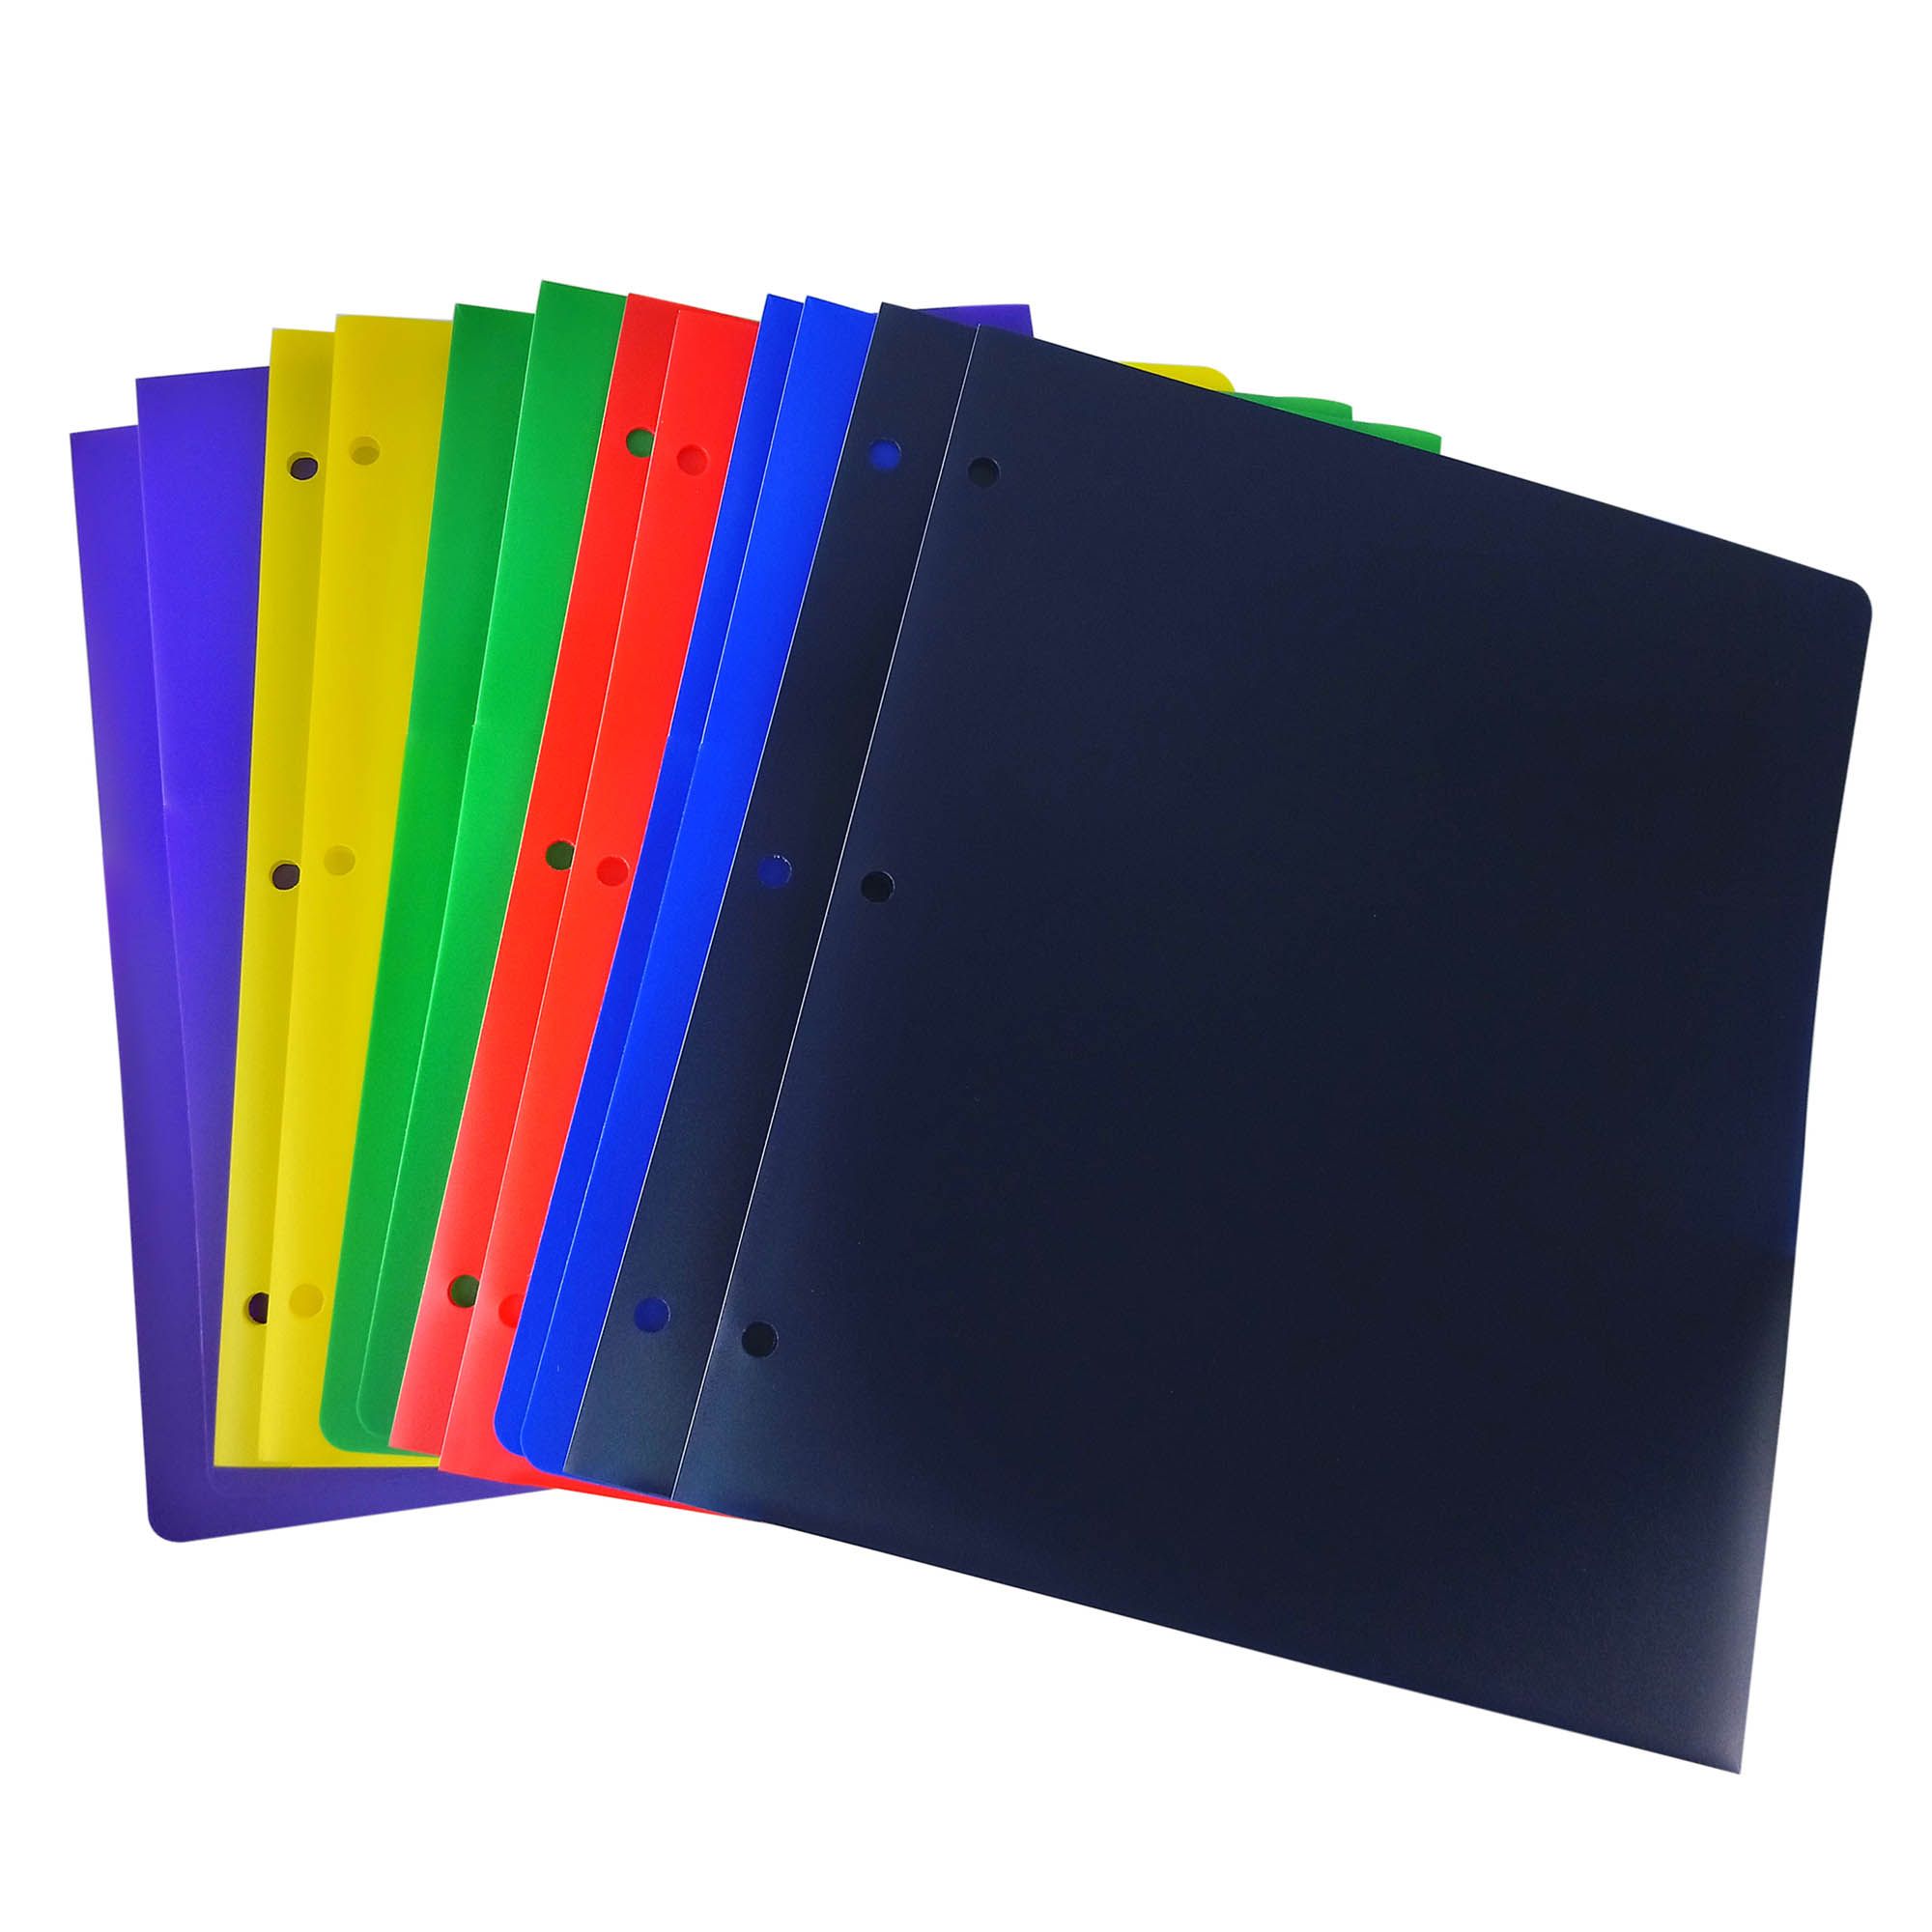 Pacon 10 Assorted Color Construction Paper Pack, 400 Sheets